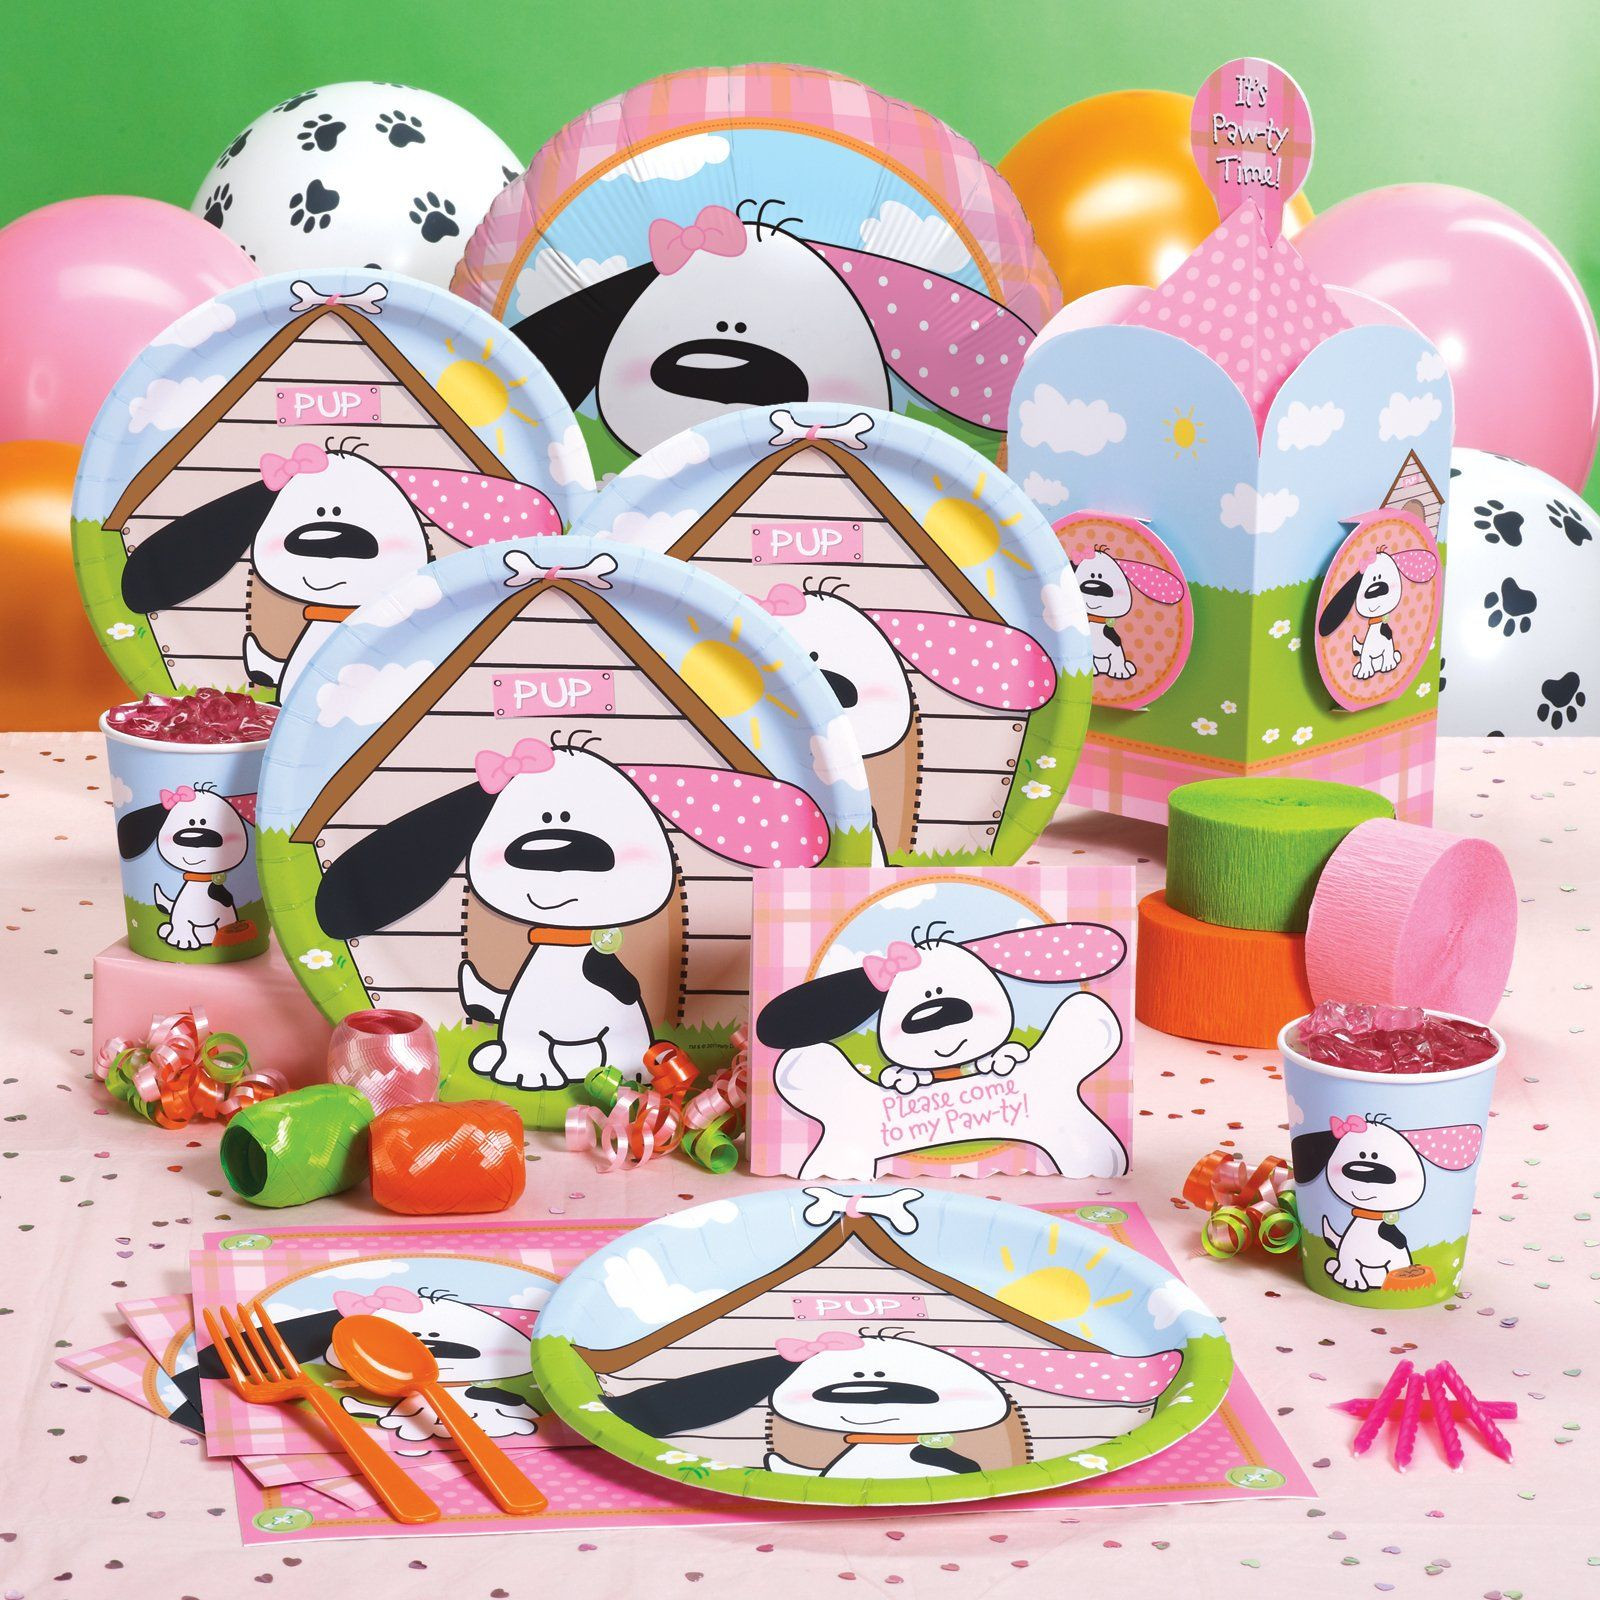 Puppy Birthday Party Supplies
 Playful Puppy Pink Party Supplies Loves this stuff too